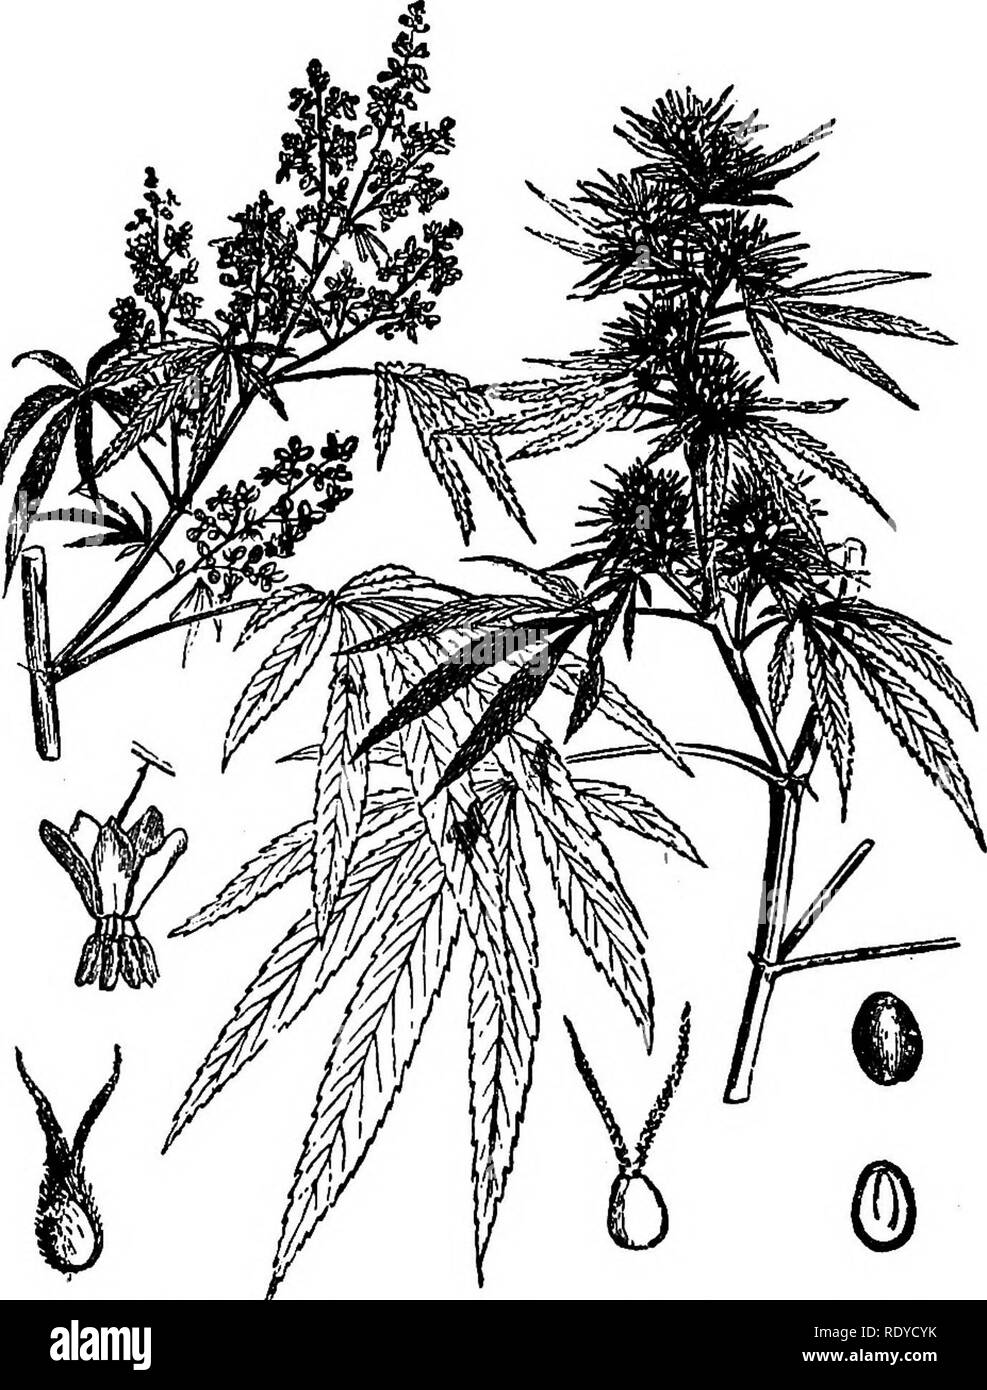 . A manual of poisonous plants, chiefly of eastern North America, with brief notes on economic and medicinal plants, and numerous illustrations. Poisonous plants. 410 MANUAL OF POISONOUS PLANTS Genera of Urticaceae IJerbs with stinging hairs. L,eaves opposite; flowers 4-parted 2. Urtica. Leaves alternate; st'aminate flowers S-parted 3. Laportea. Herbs or trees without stinging hairs. Herbs; pistillate flowers spiked 1. Cannabis. Trees; staminate flowers racemose '4. Madura. 1. Cannabis, Tourn. Hemp Dioecious herbs with tough fiber to the inner bark; greenish flowers; sepals 5 in the staminate, Stock Photo